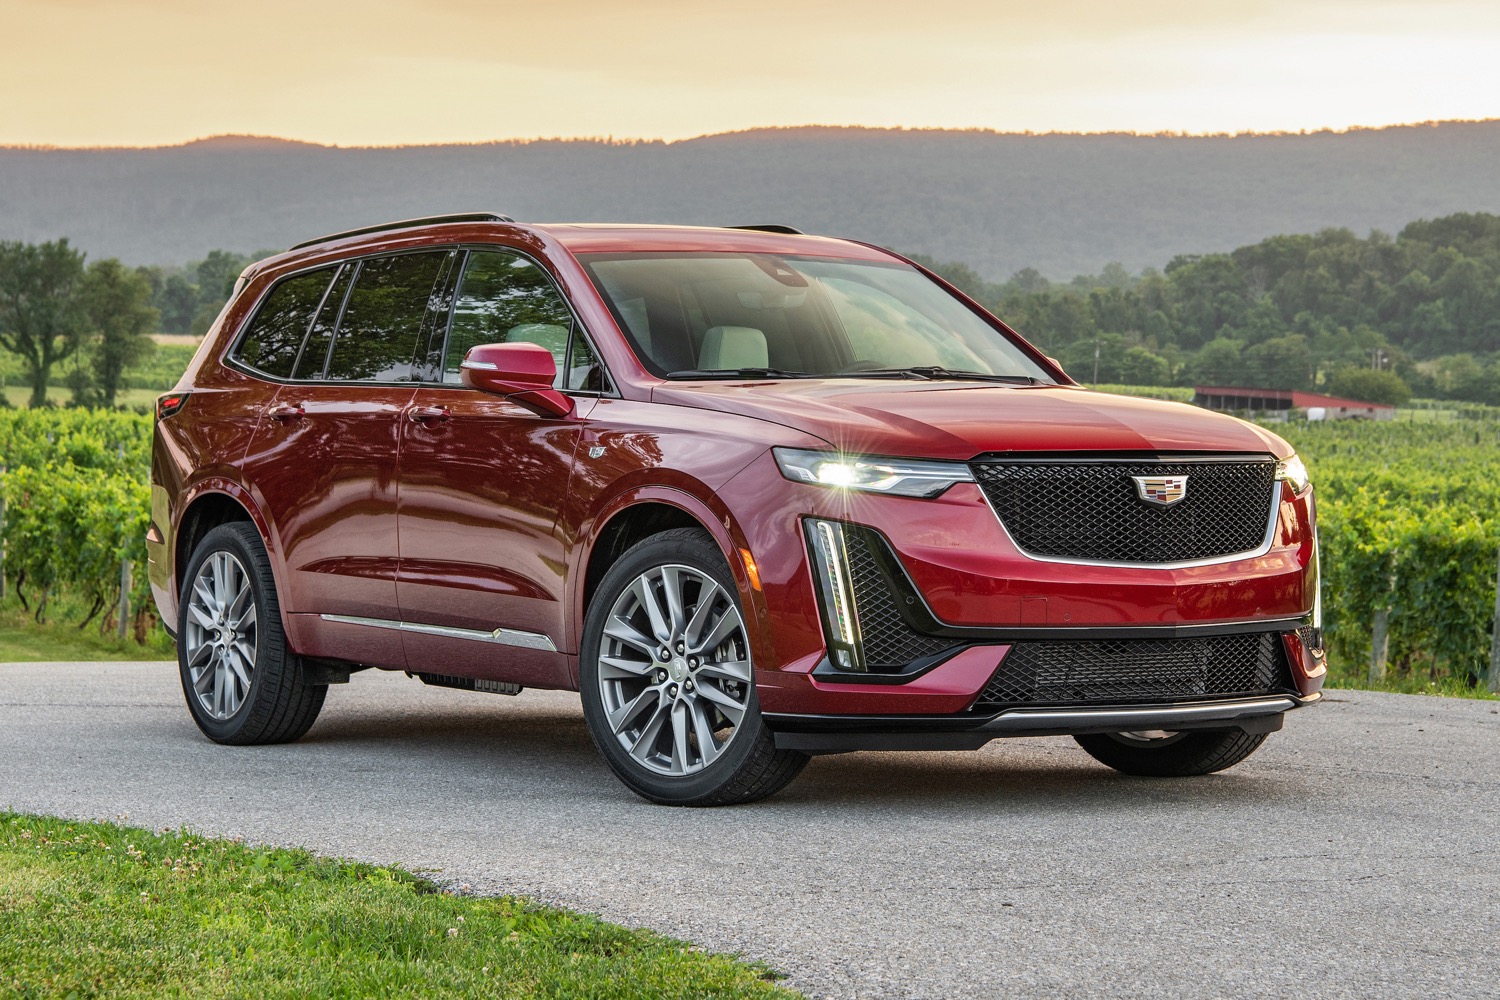 new sport models account for half of cadillac sales volume